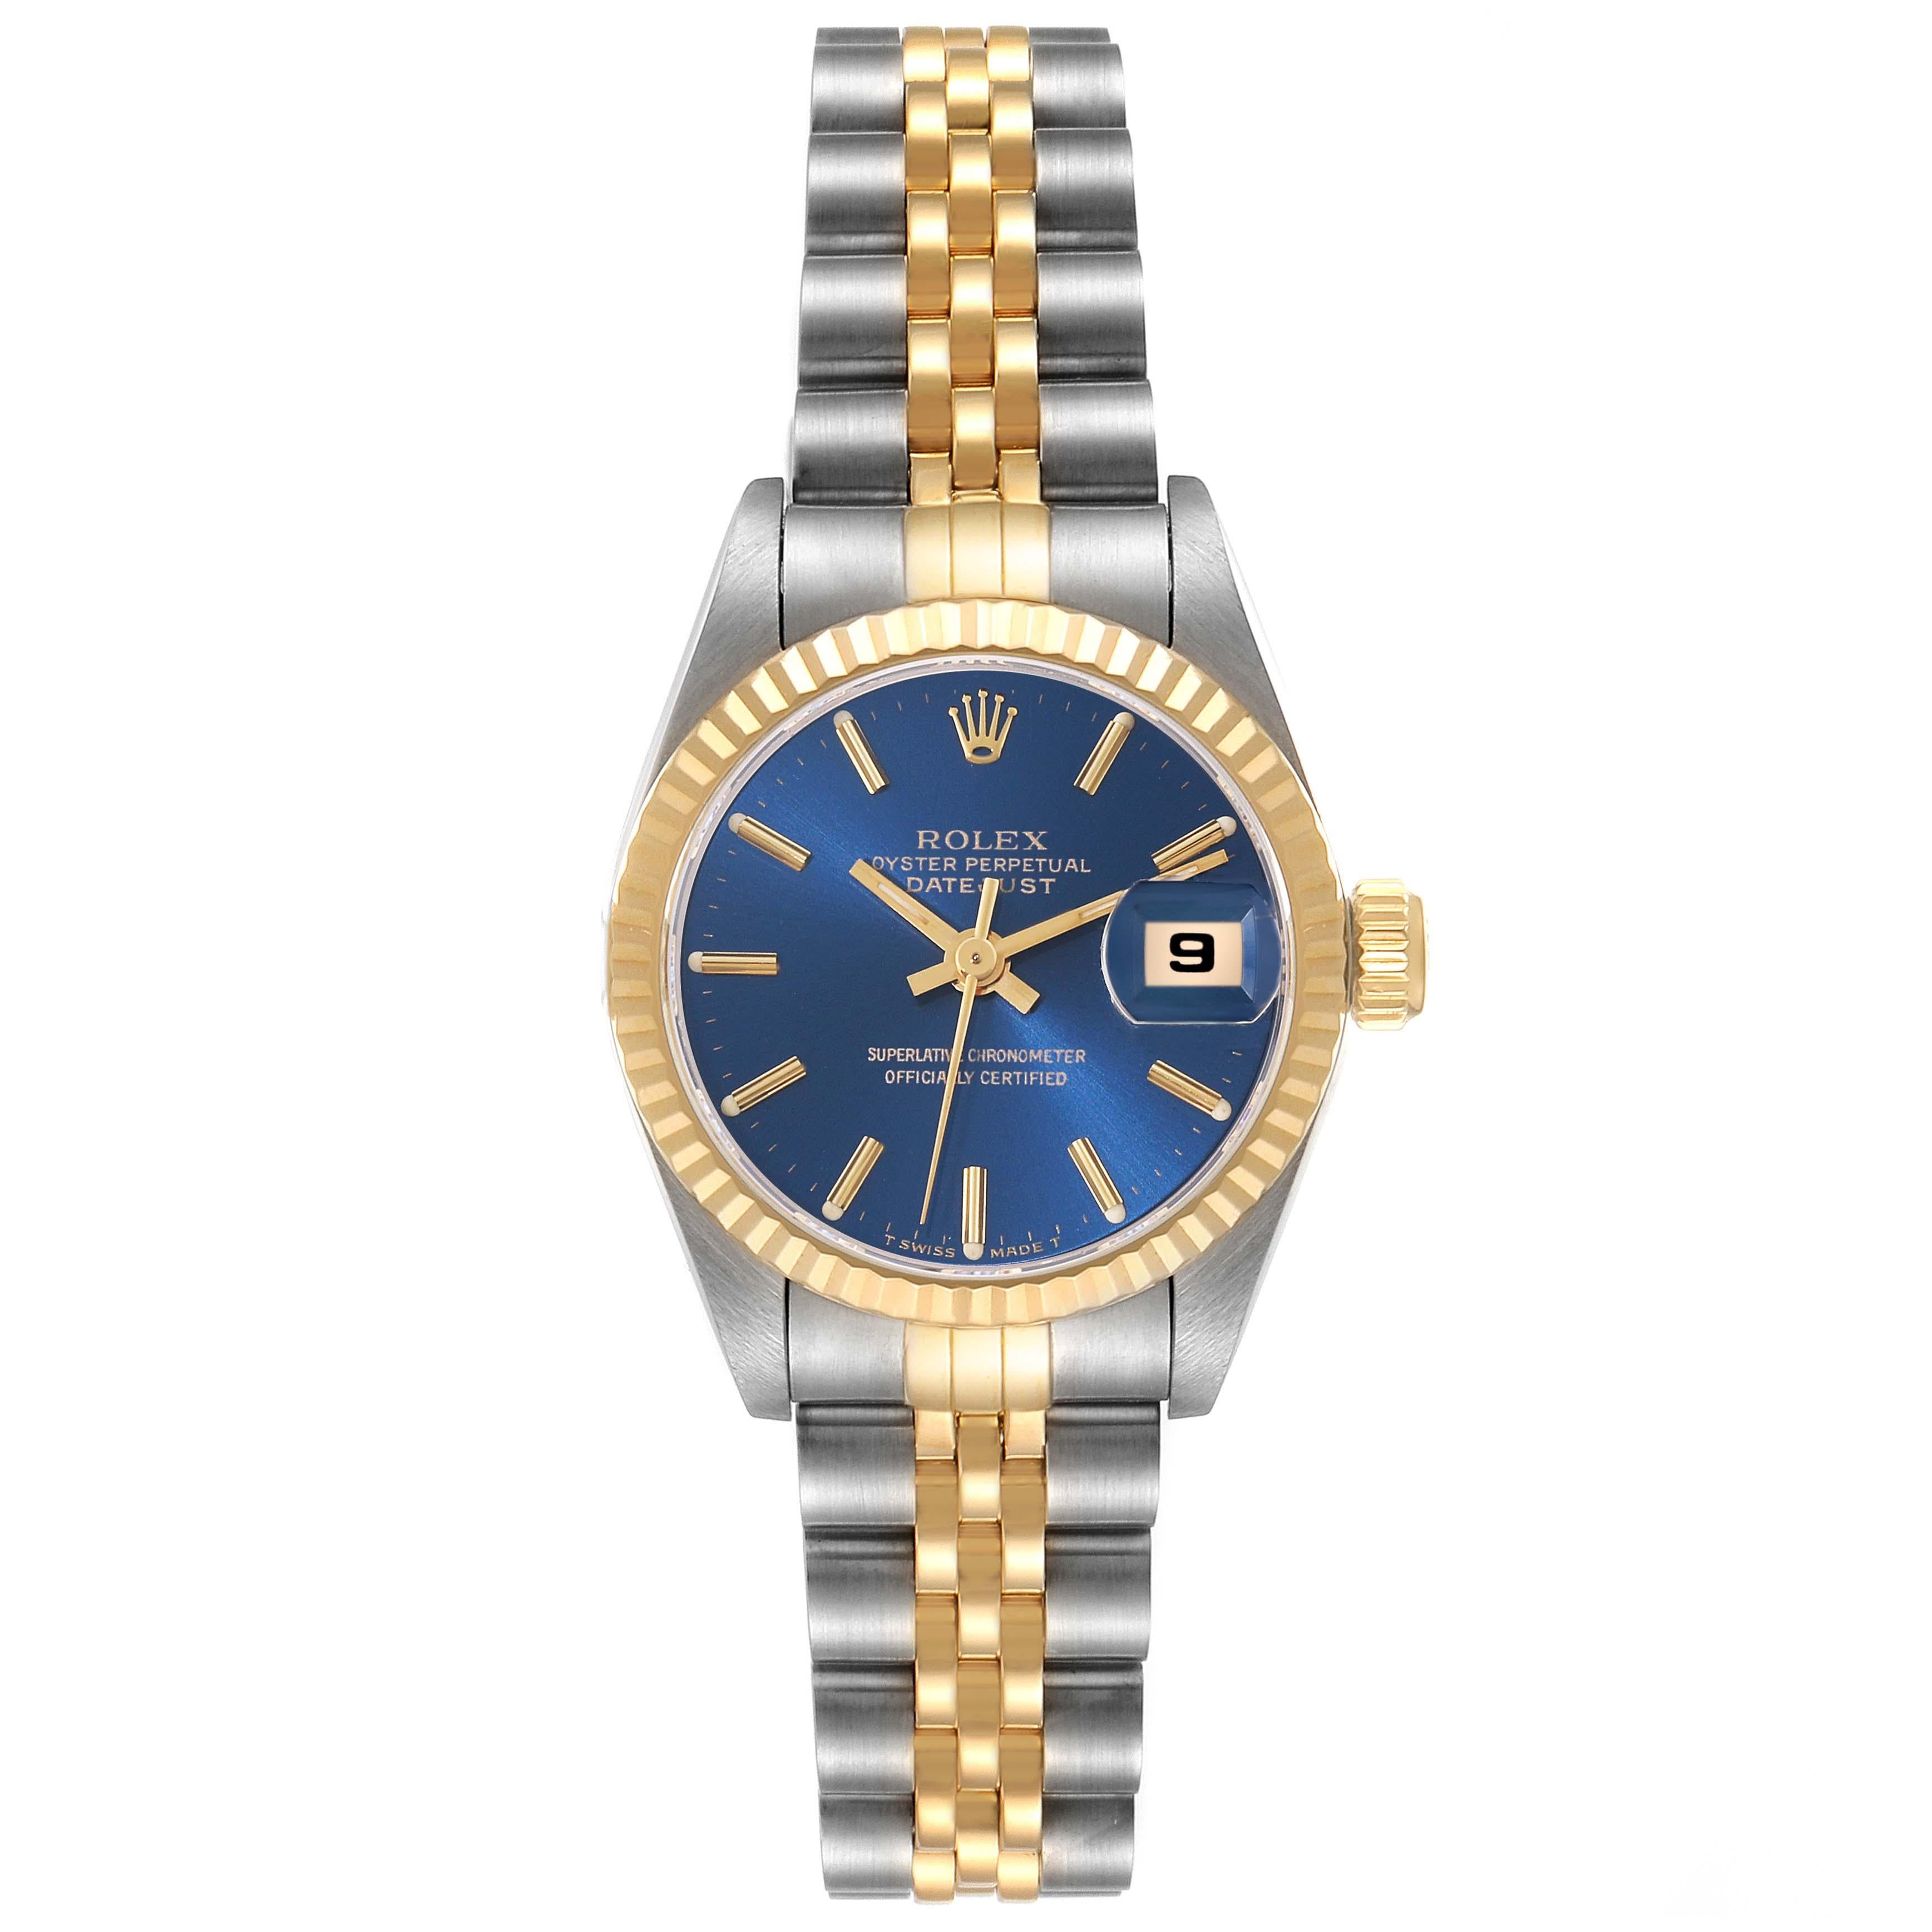 Rolex Datejust Blue Dial Steel Yellow Gold Ladies Watch 69173. Officially certified chronometer automatic self-winding movement. Stainless steel oyster case 26.0 mm in diameter. Rolex logo on the crown. 18k yellow gold fluted bezel. Scratch